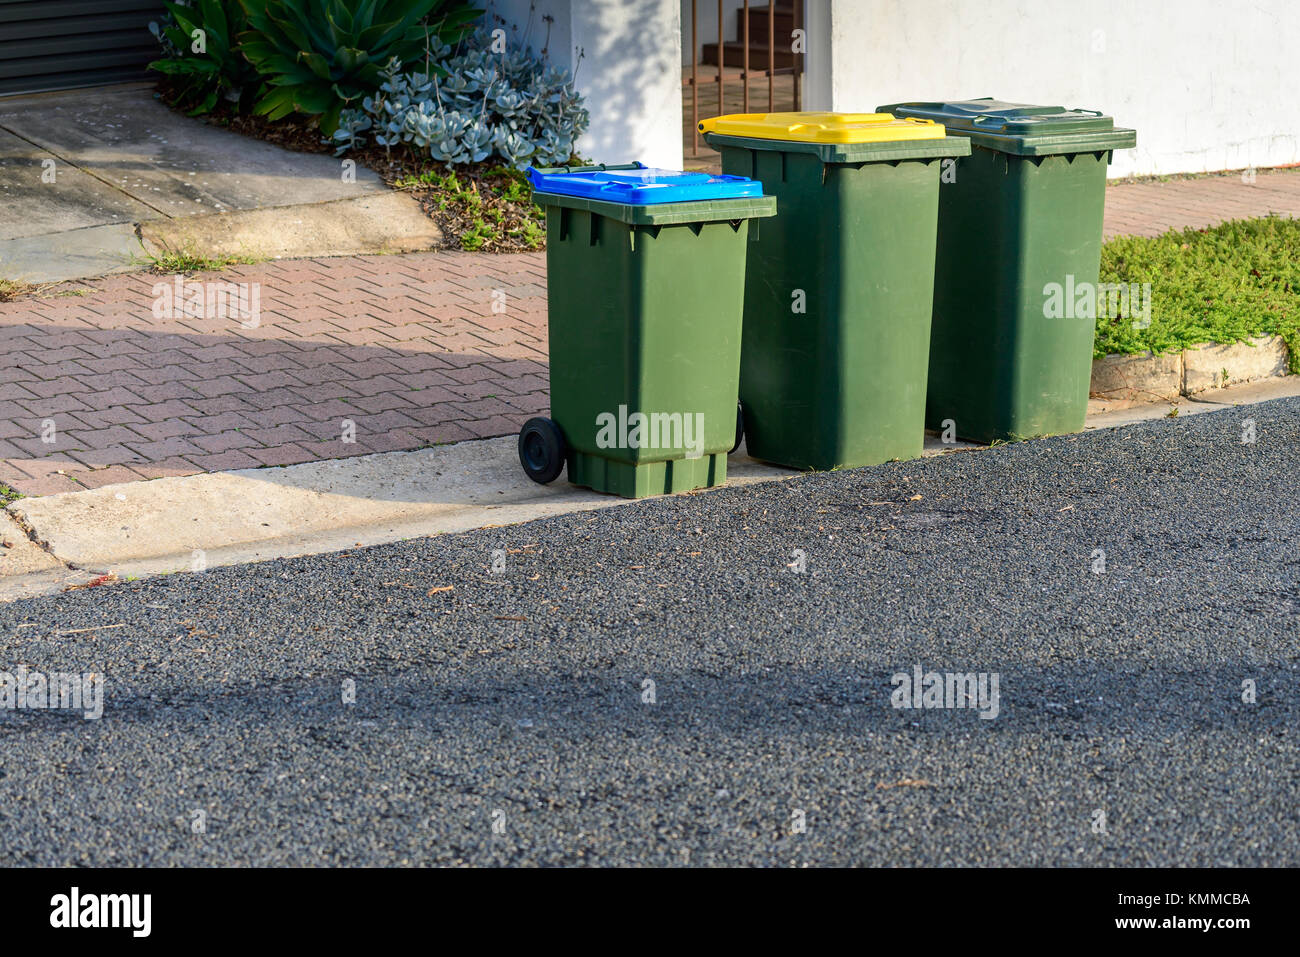 Kerbside waste bins ready for collection by local council in Australian suburb Stock Photo